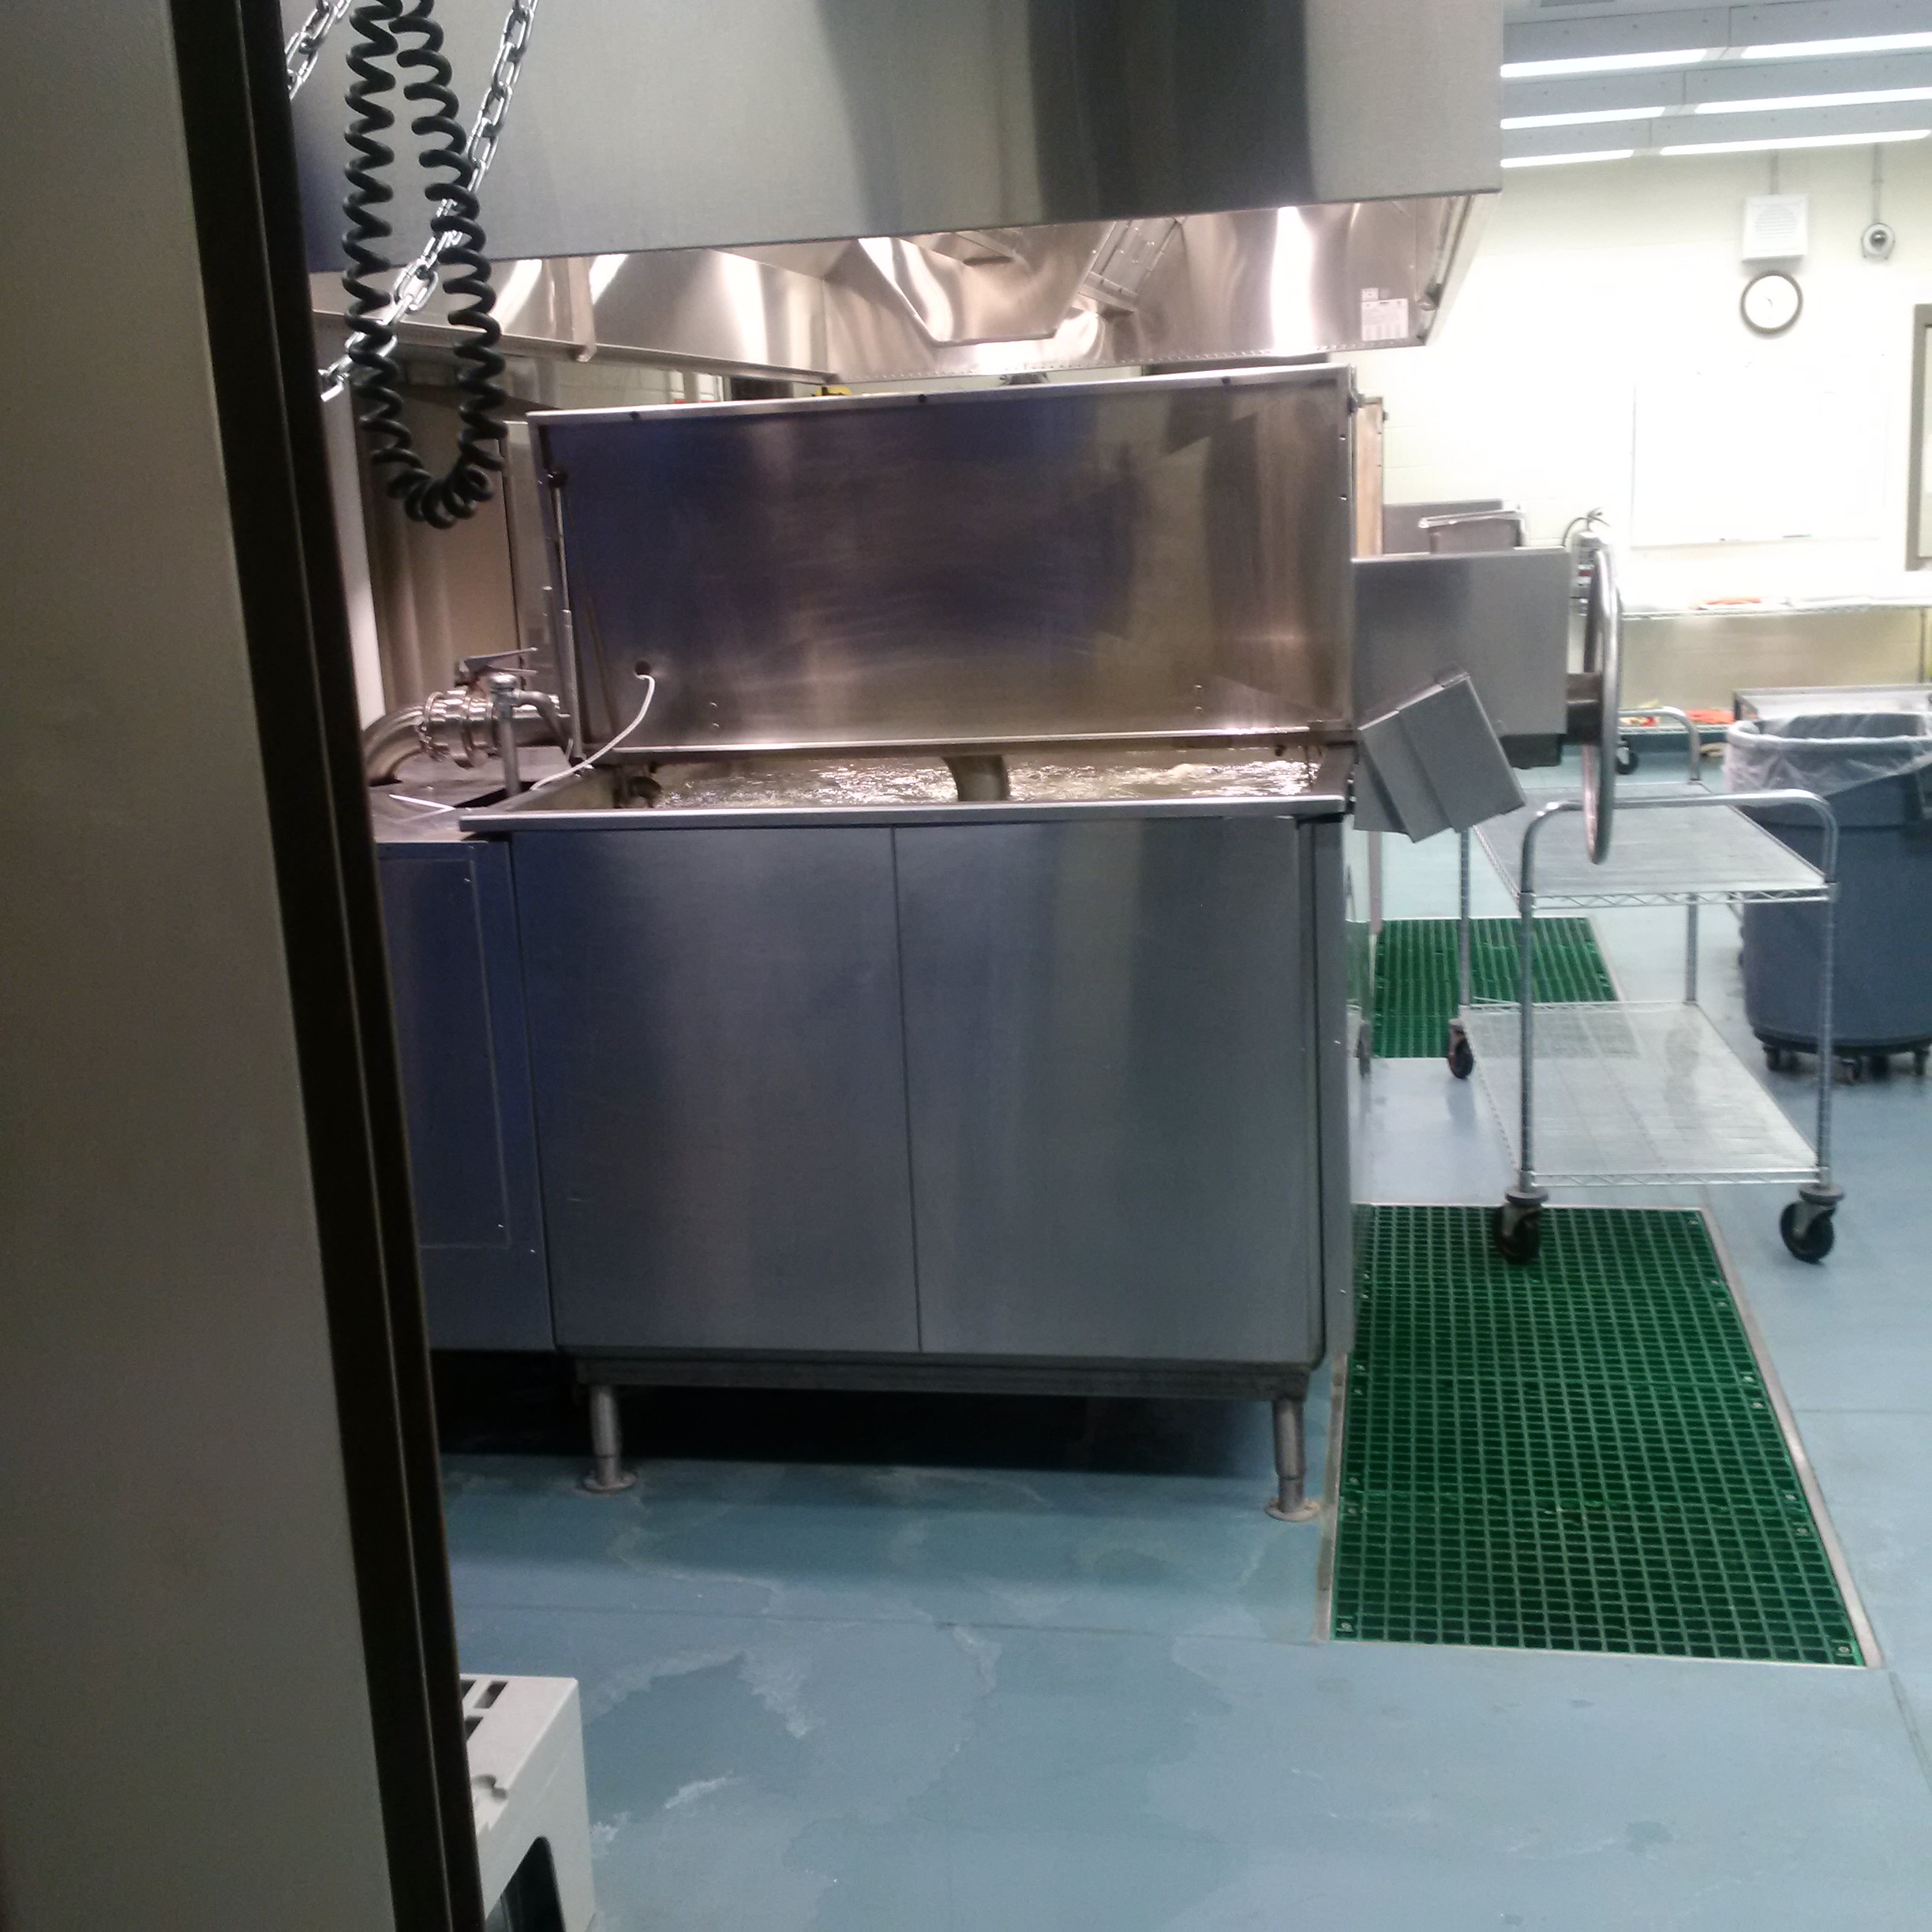 Photos of machinery used to prepare 'cook-chill' meals at Mission Institution